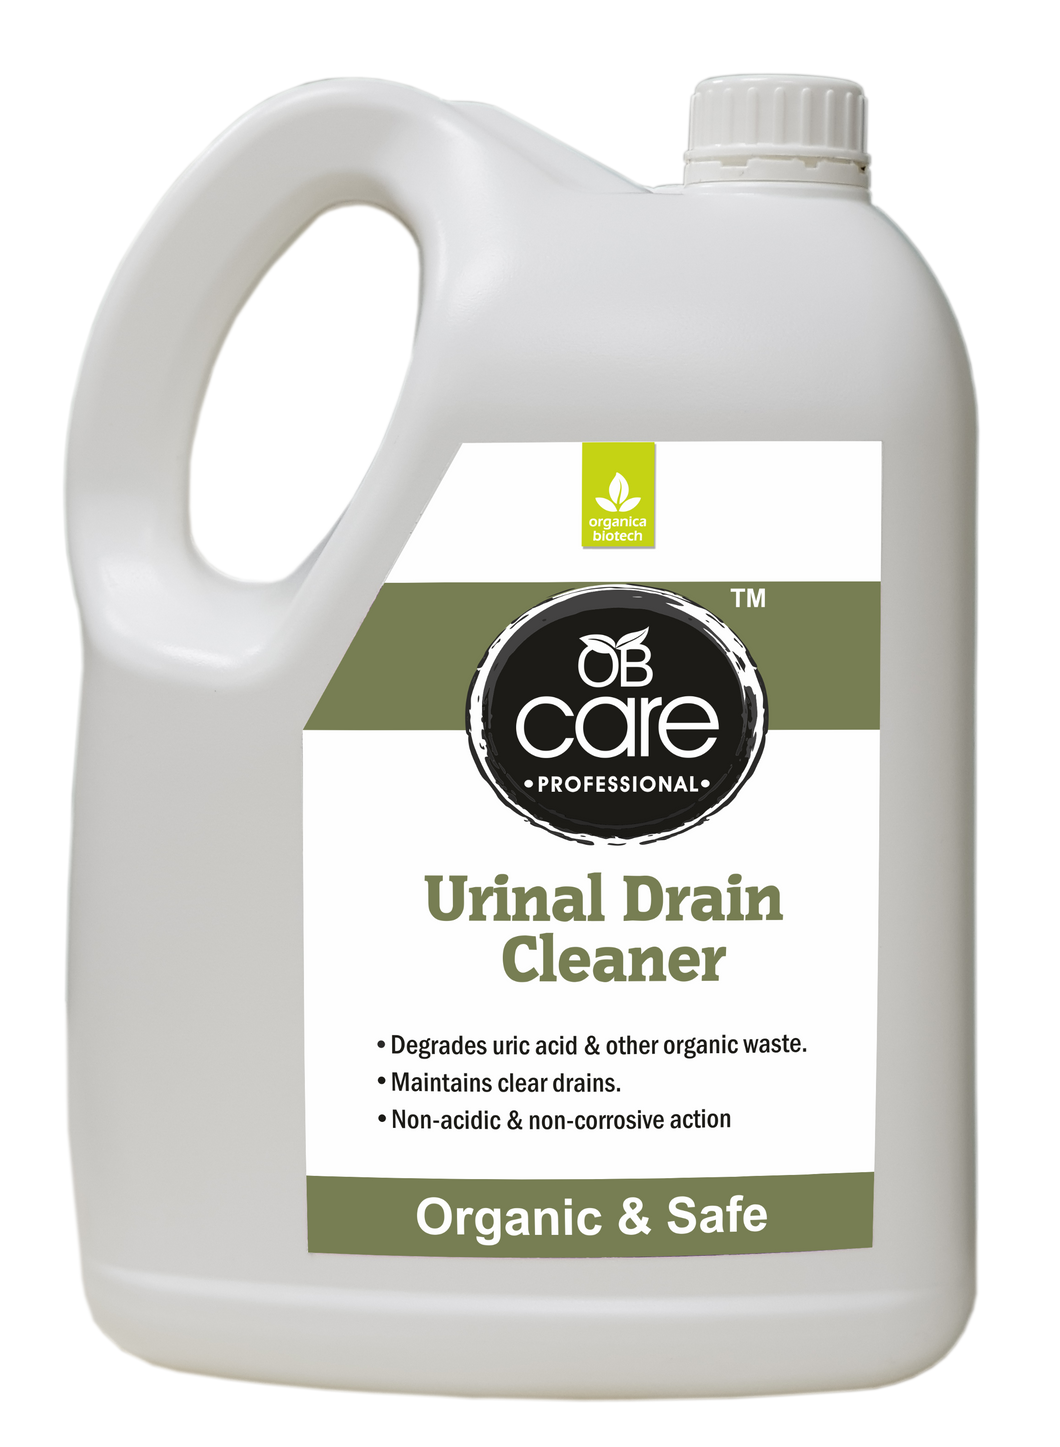 OB Care Urinal Drain Cleaner Concentrated